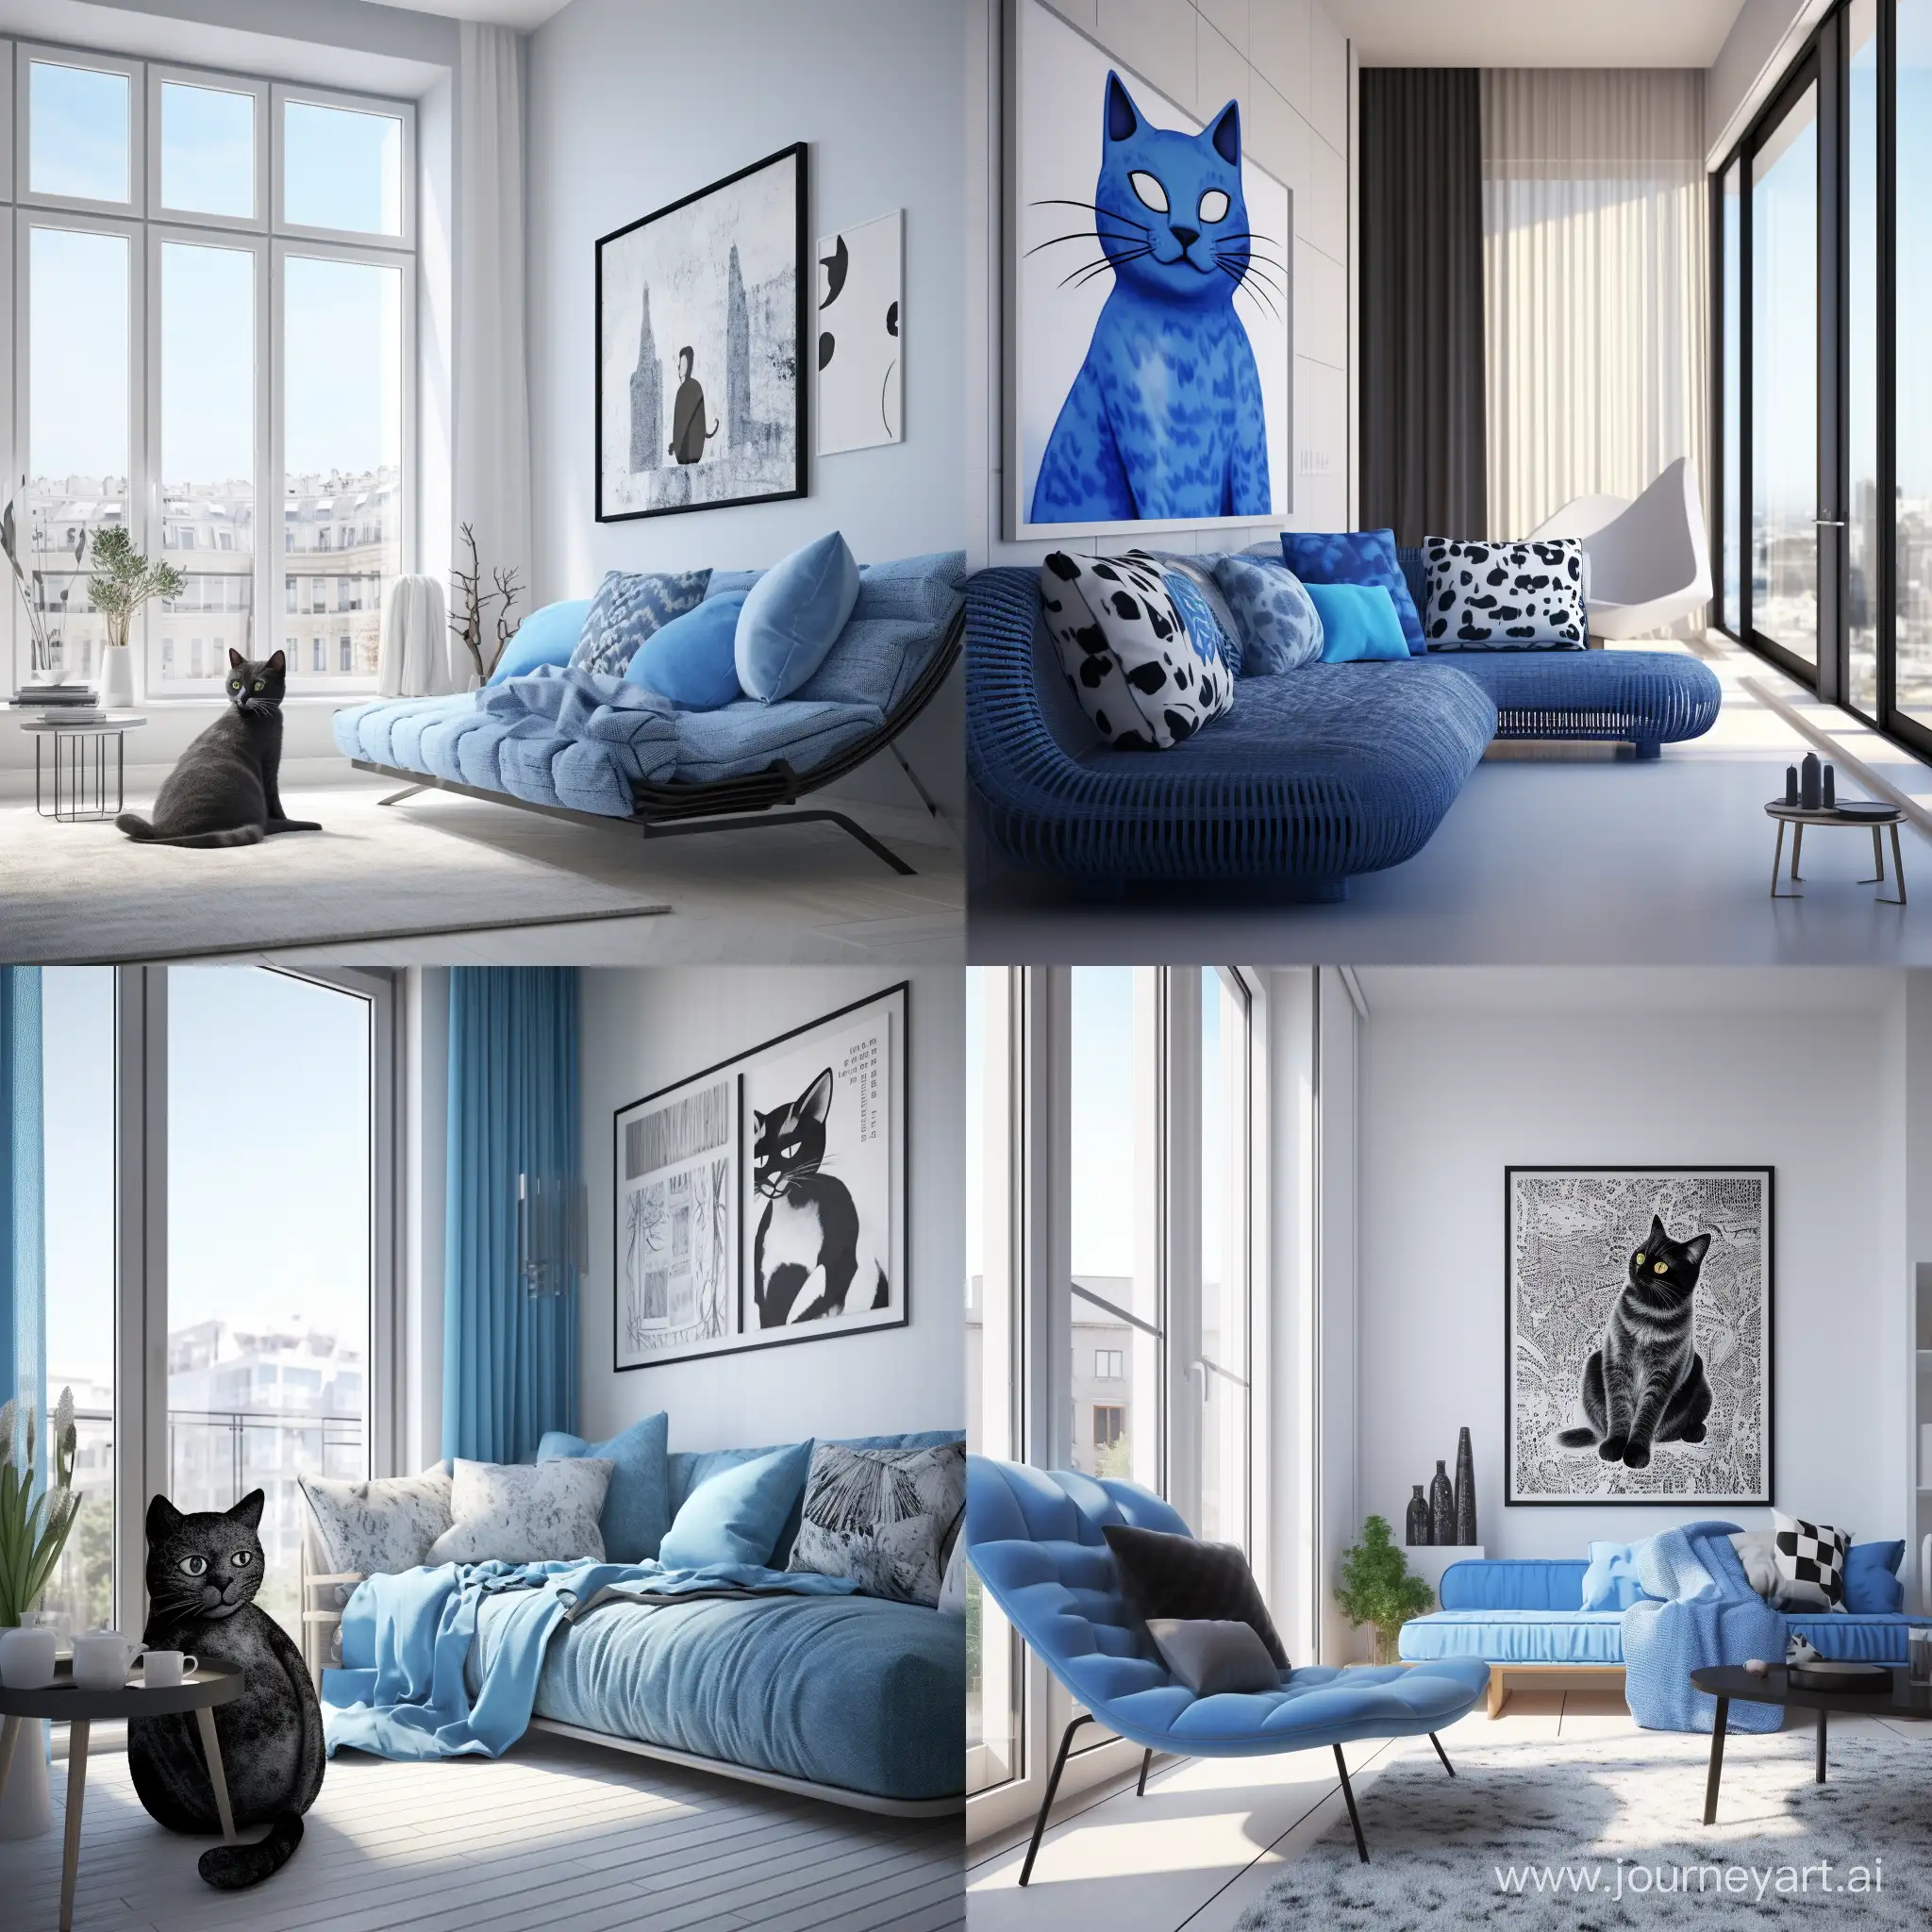 Tranquil-Harmony-Whimsical-Blue-Cat-in-Modern-Apartment